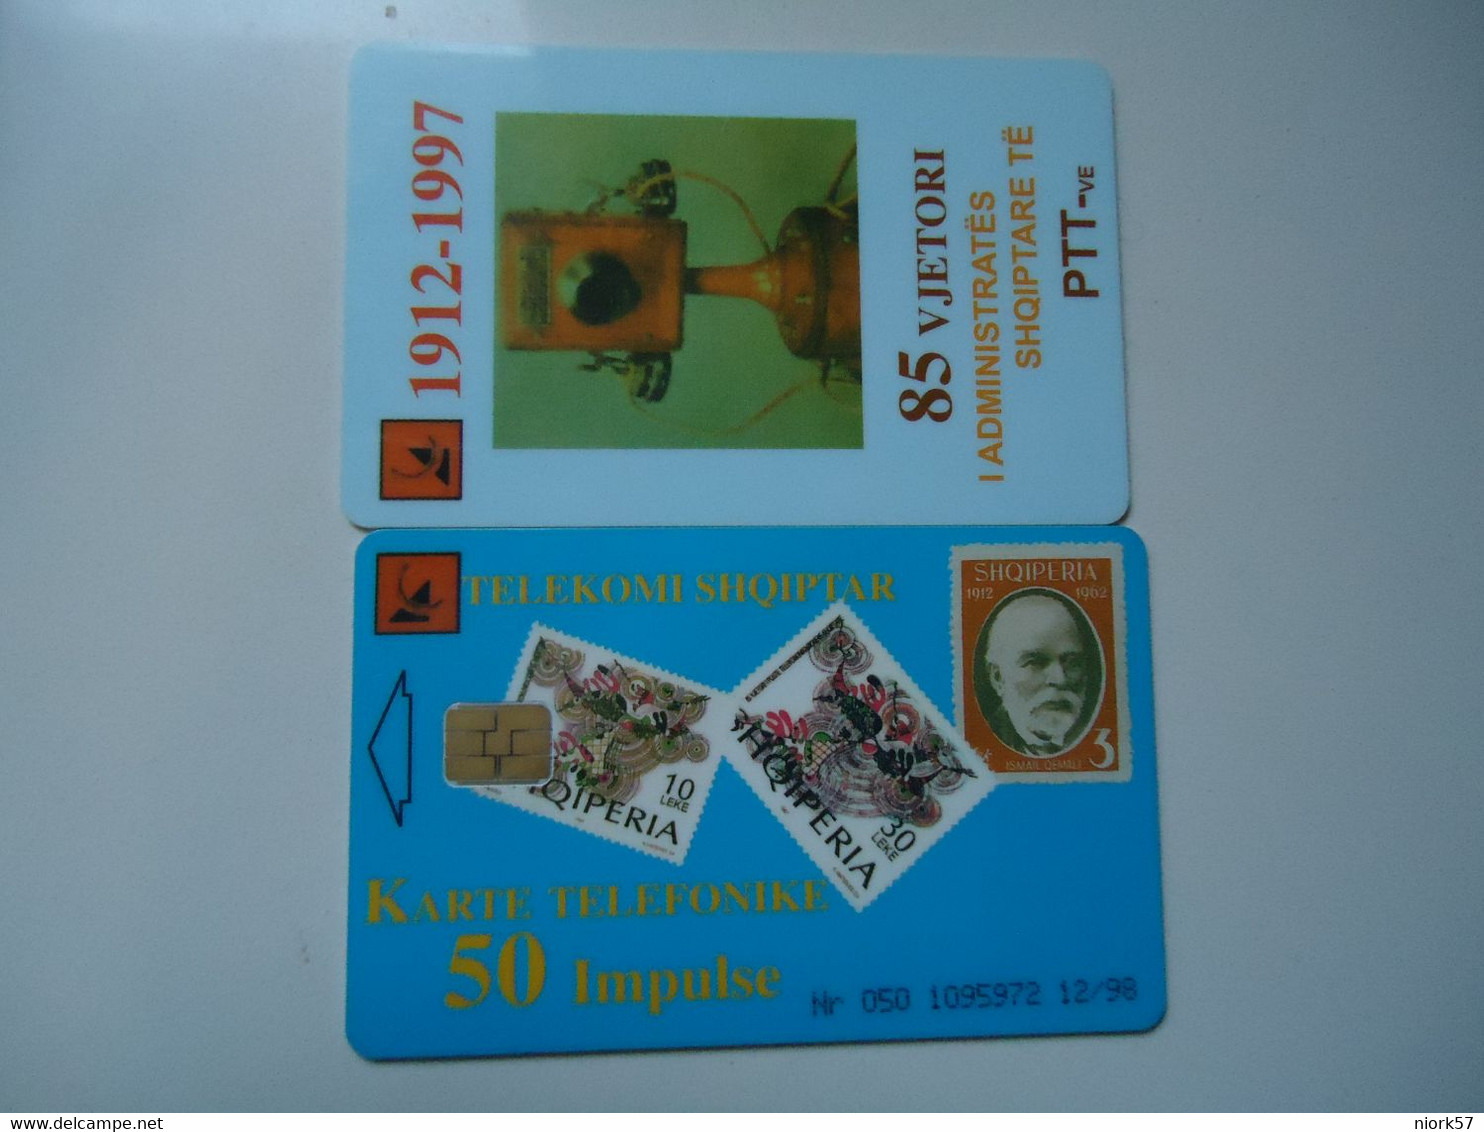 ALBANIA   USED     PHONECARDS  TELEPHONES AND STAMPS - Albanien